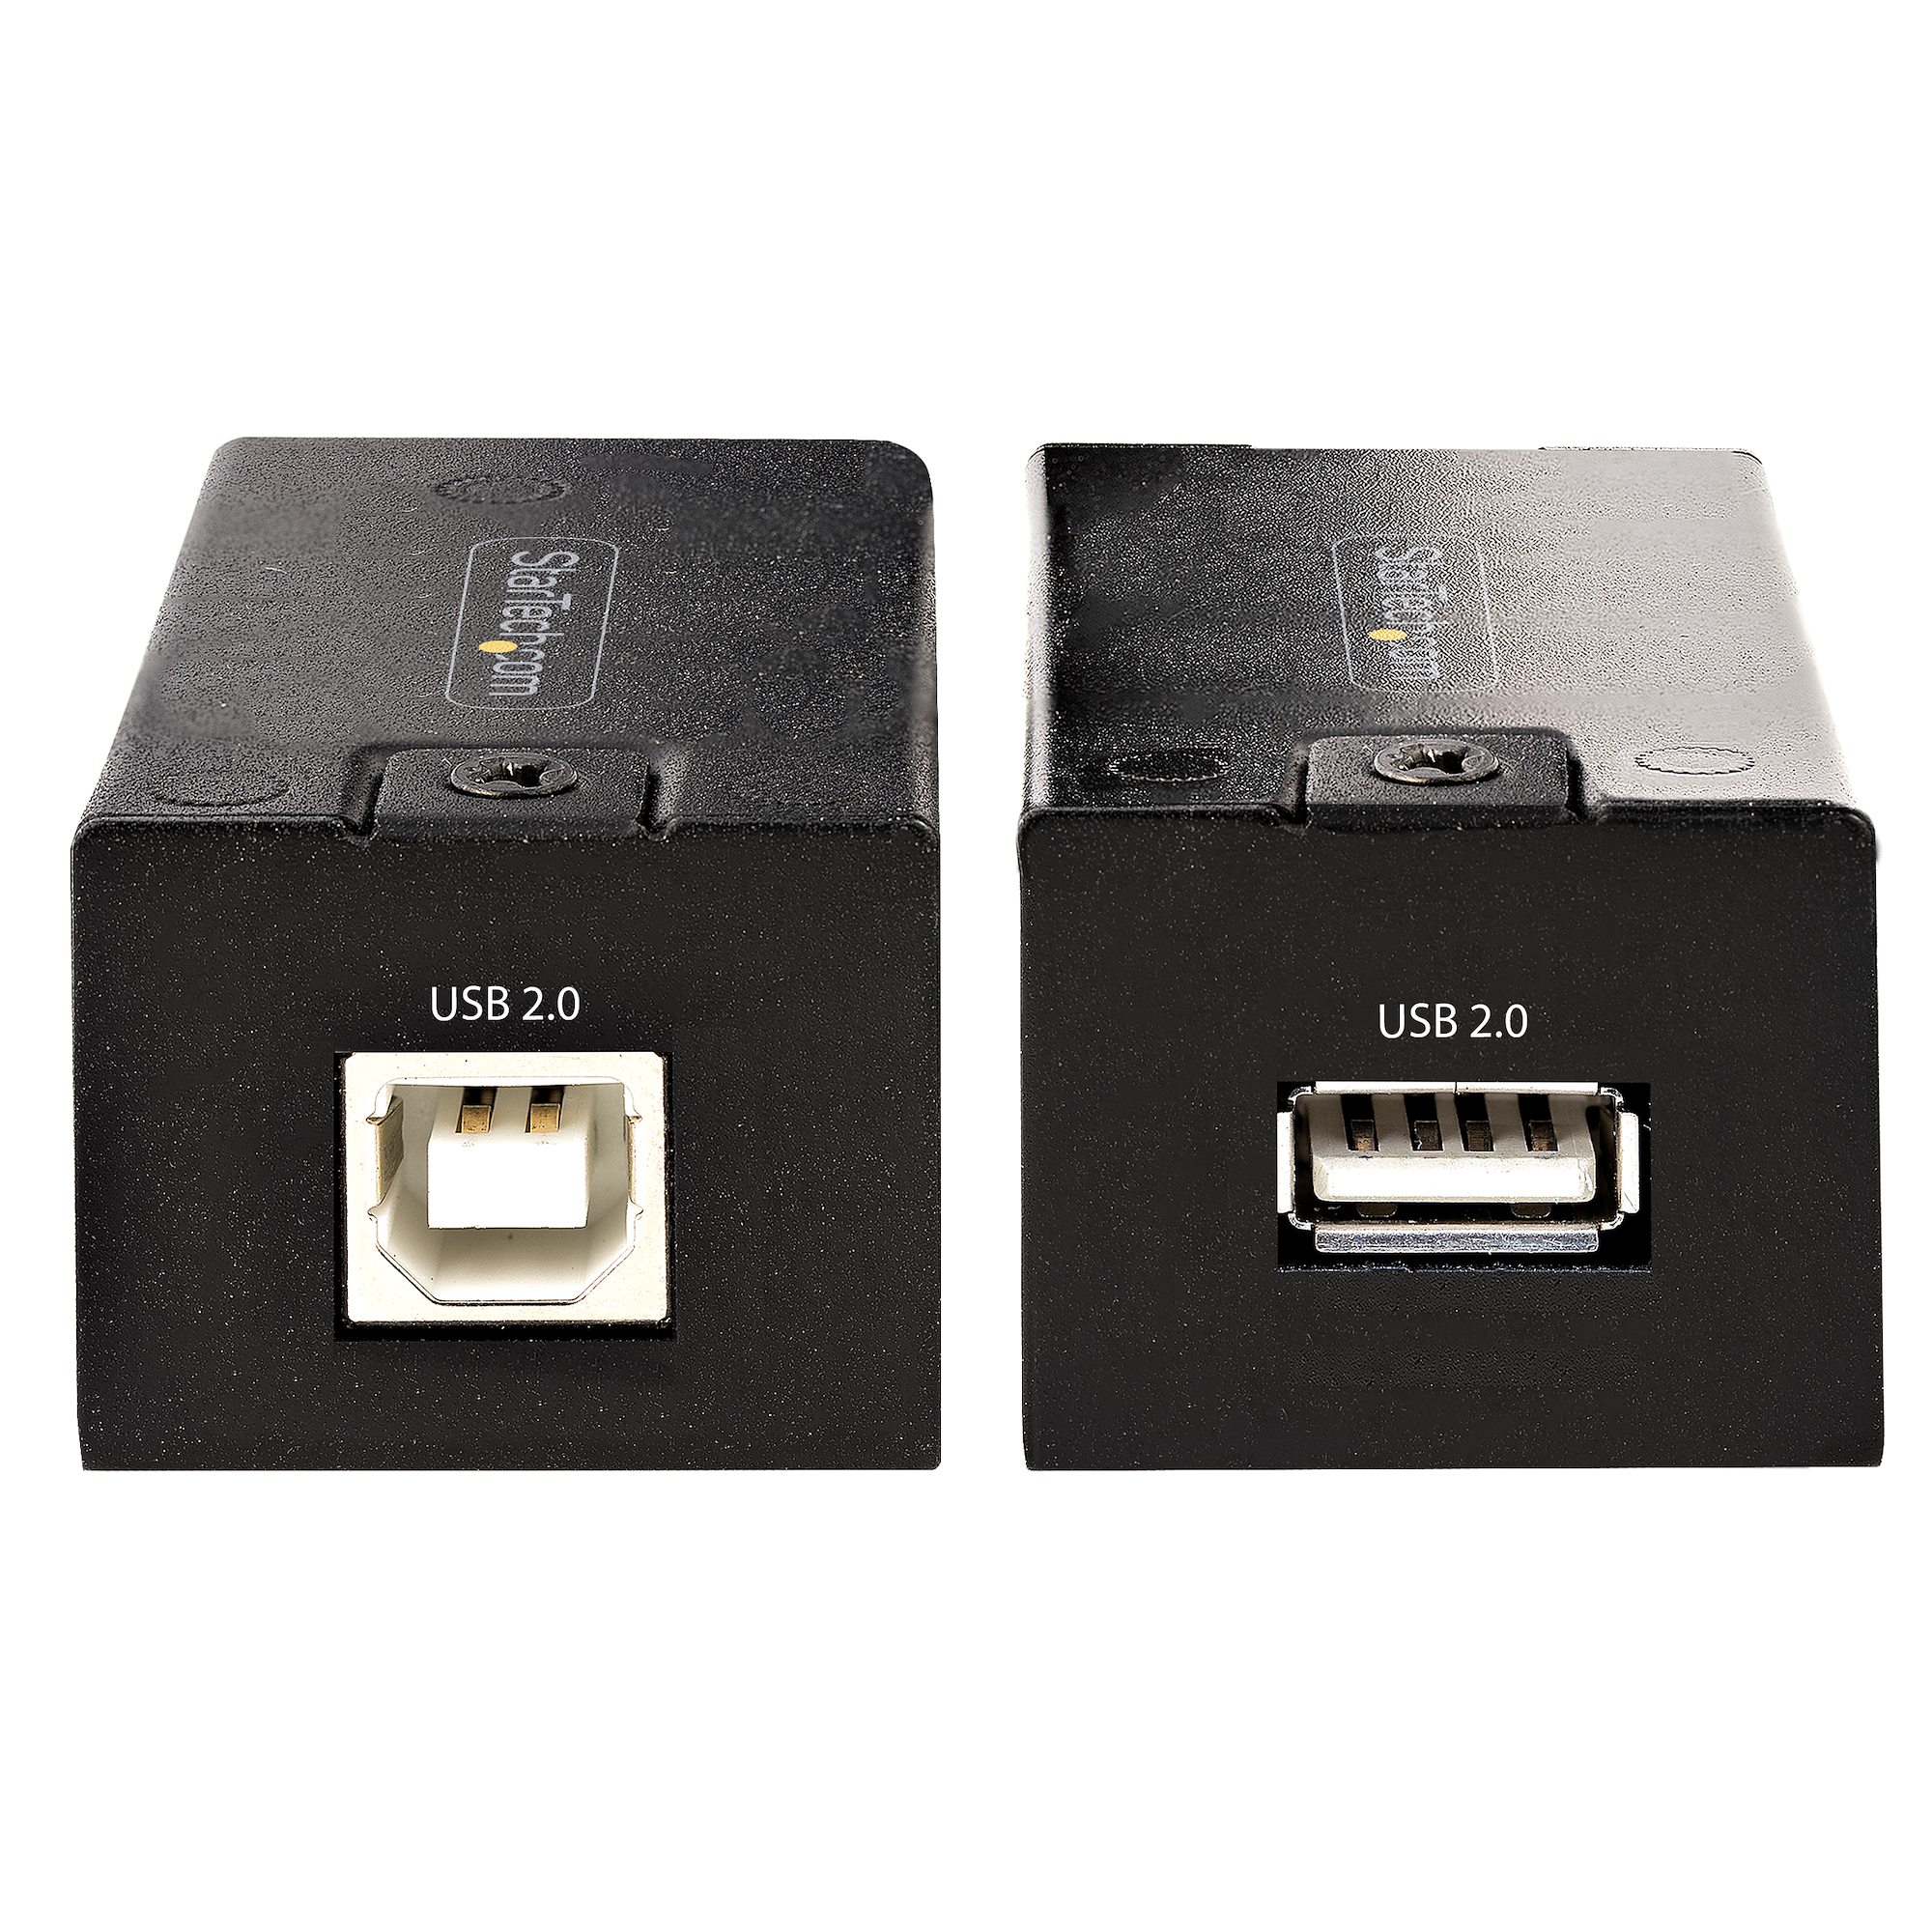 1-Port USB over Cat5/Cat6 Extender, up to 150 ft. (45.72 m)